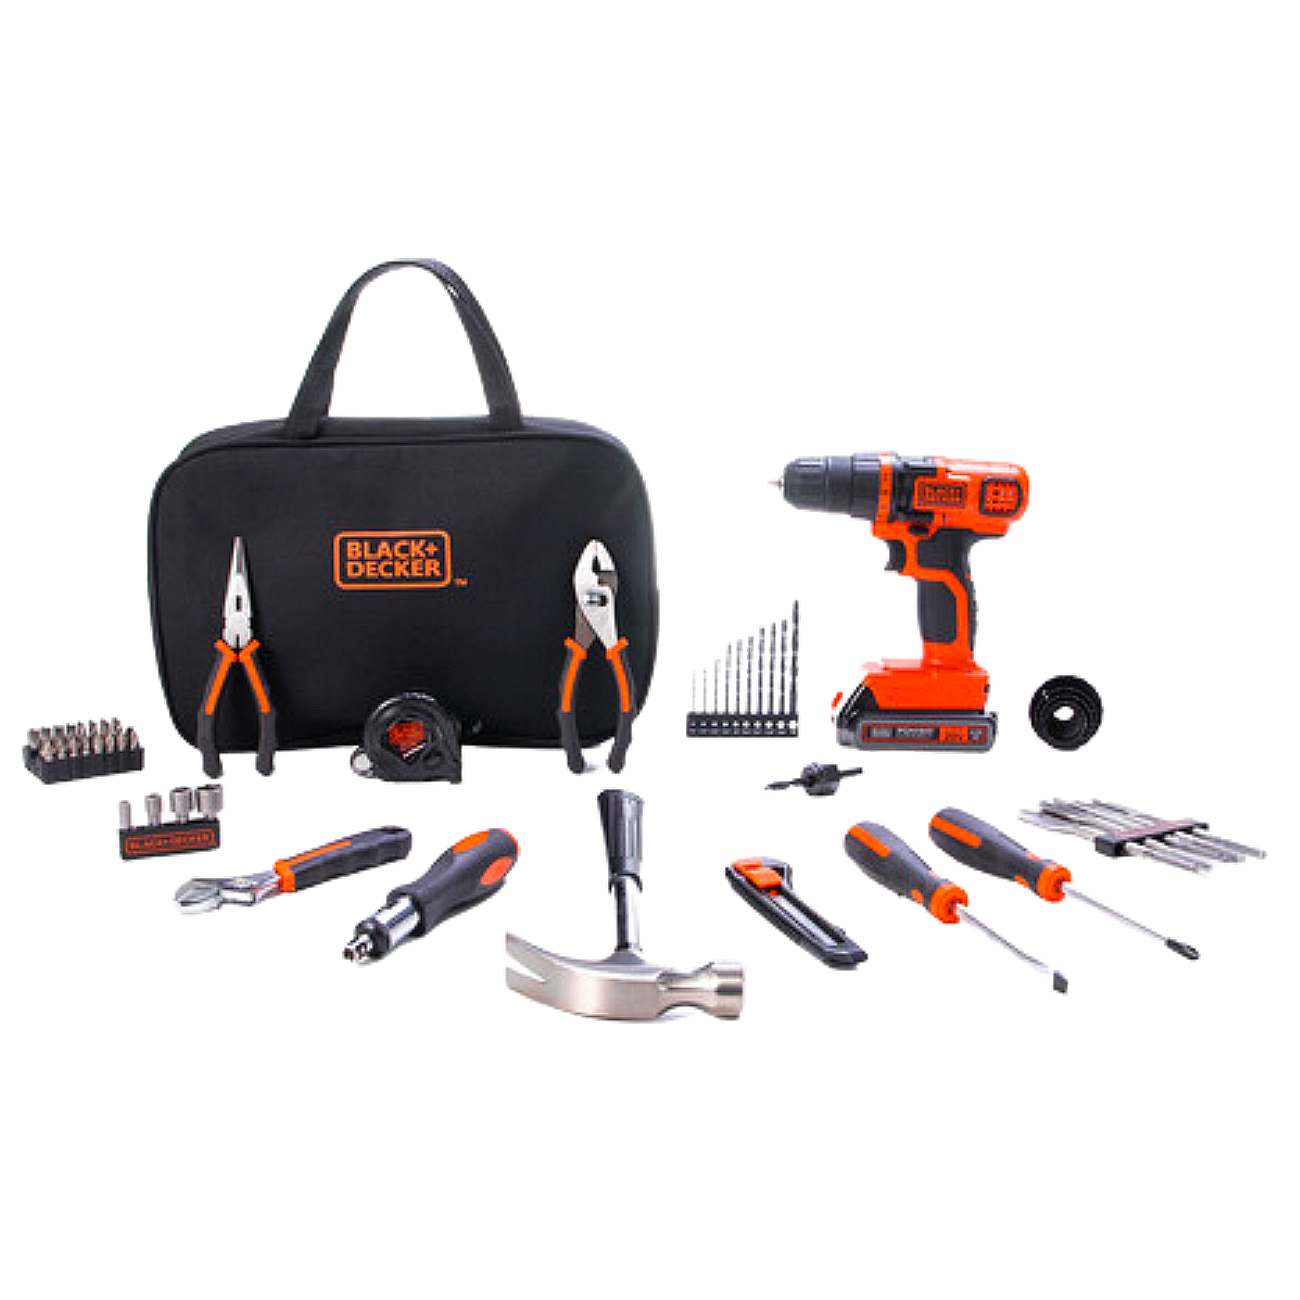 Black & Decker® LDX120PK - 66-piece Project Home Tool Set in Tool Bag and  20 V MAX Lithium Ion Drill/Driver 